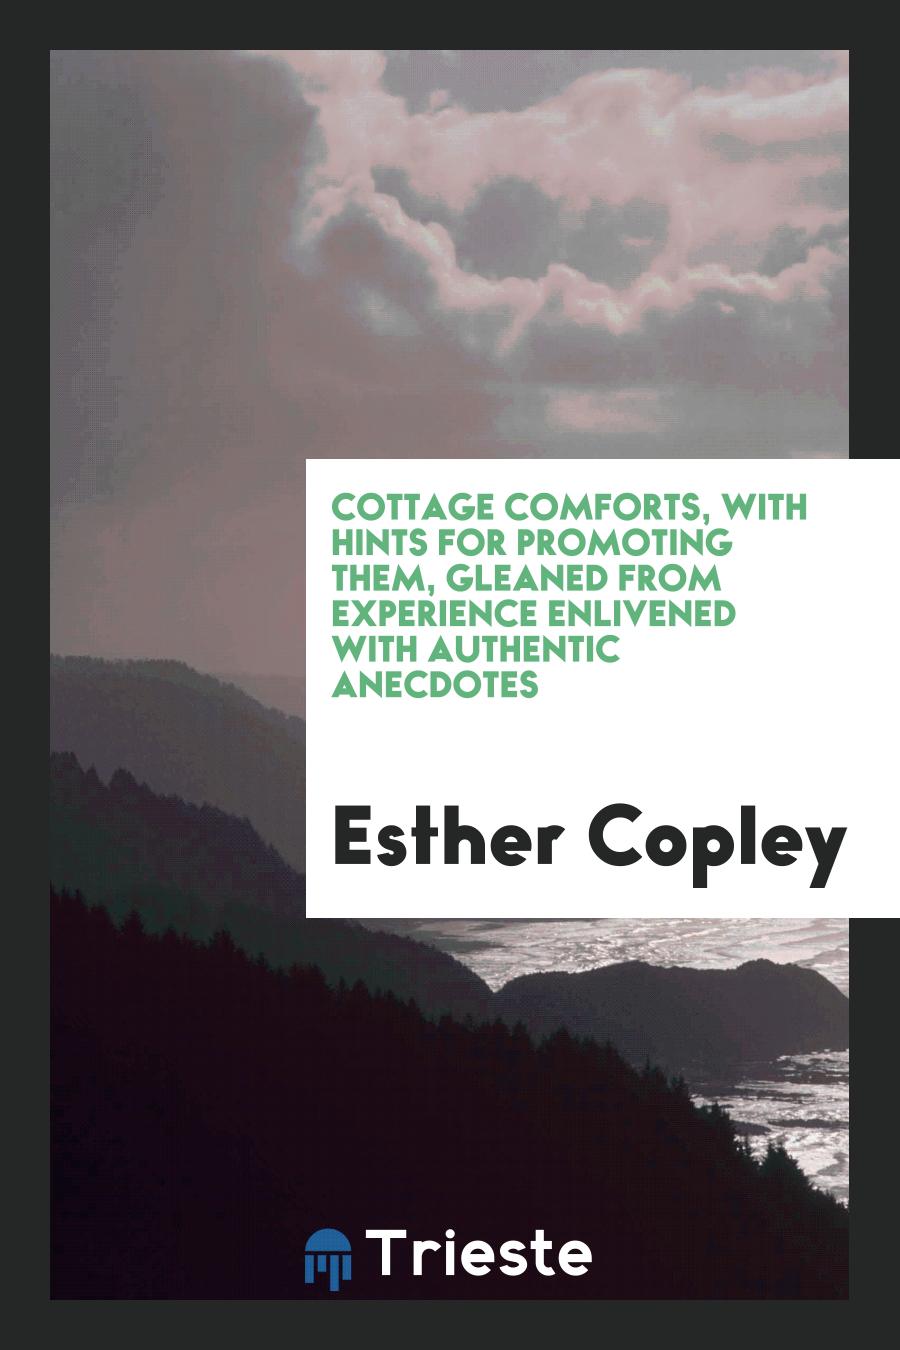 Cottage Comforts, with Hints for Promoting Them, Gleaned from Experience Enlivened with Authentic Anecdotes